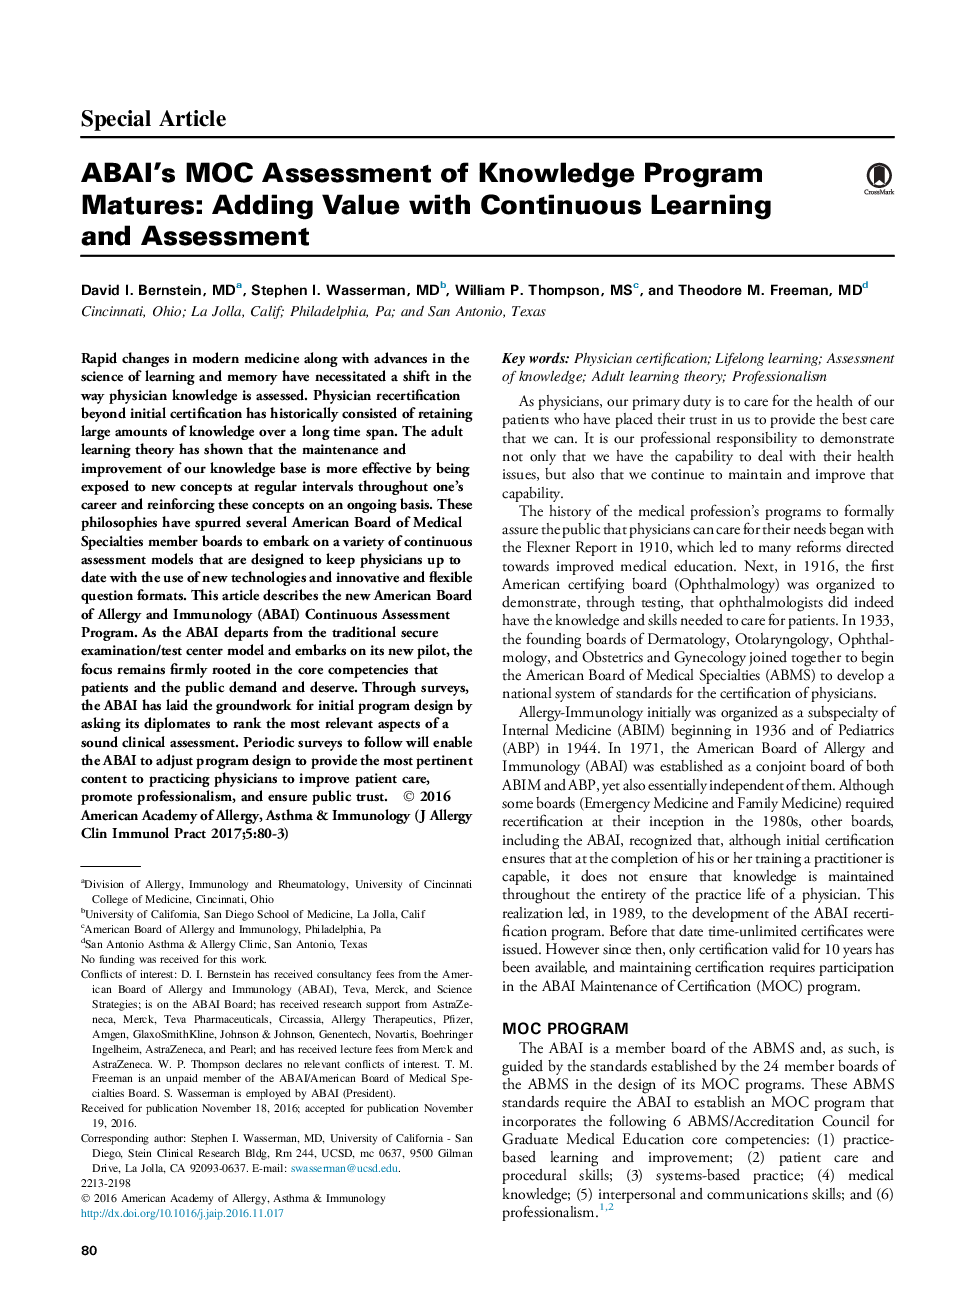 ABAI's MOC Assessment of Knowledge Program Matures: Adding Value with Continuous Learning and Assessment